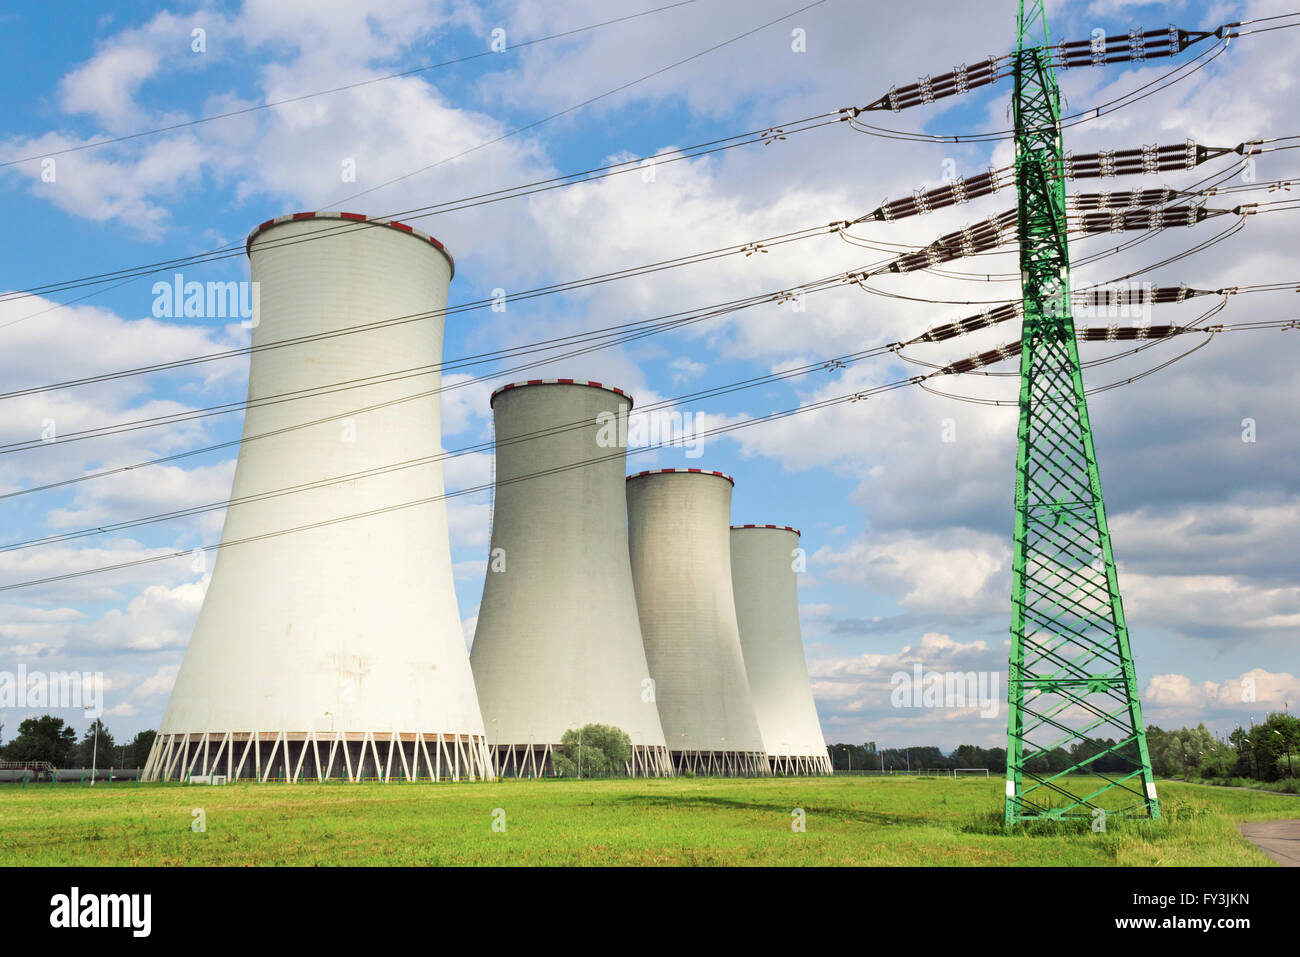 High-voltage line in front of cooling towers Stock Photo